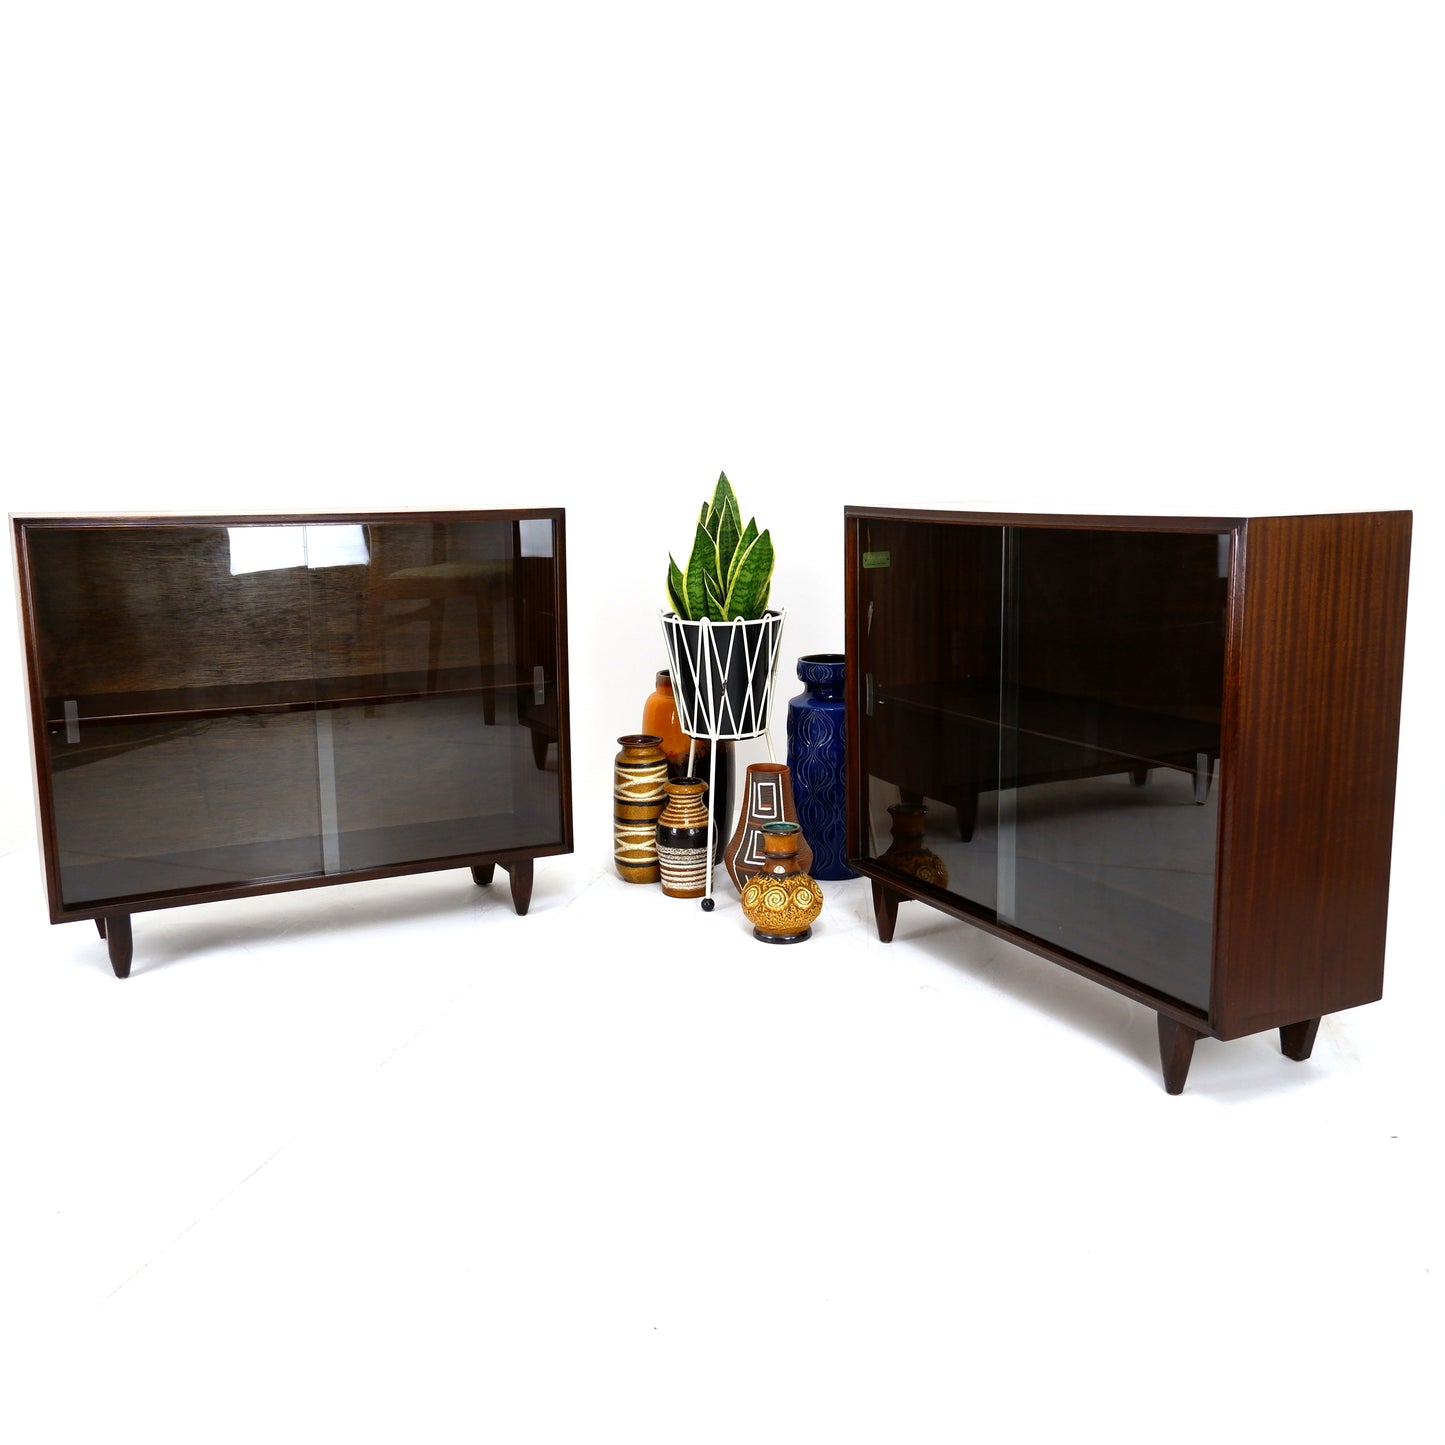 Pair of Mid Century Rosewood Bookcases / Display Cabinets by Beaver & Tapley Multi width